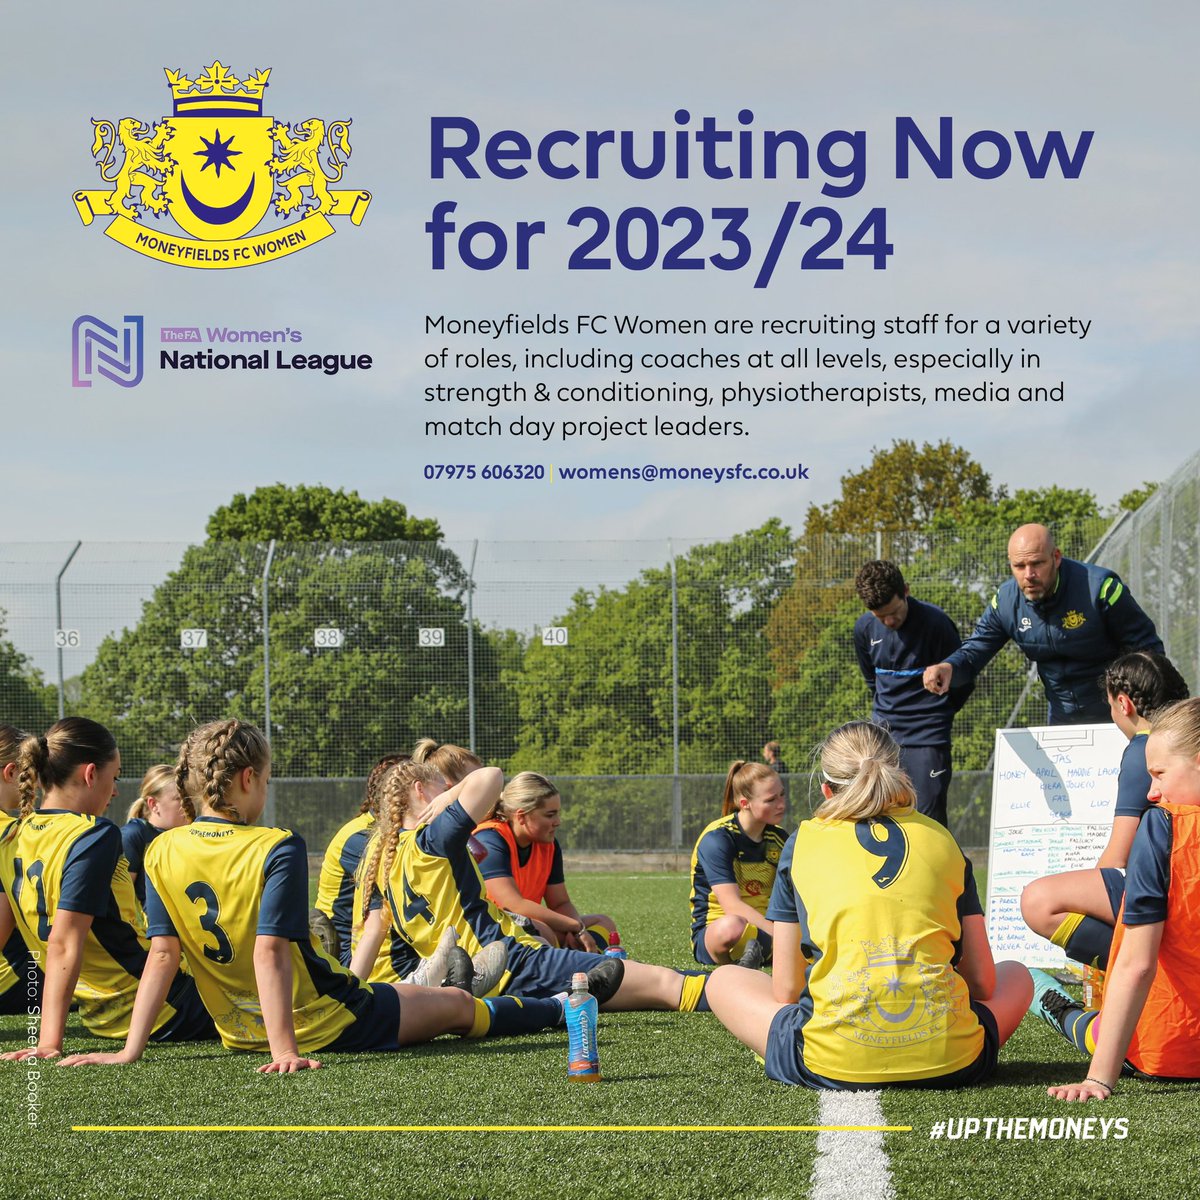 We are recruiting coaches and staff for a variety of rolls at ALL levels. Especially at U18, U16, S&C, Physios, Media and Match Day. 

☎️ 07975 606320
📲 DMs Open
📬 womens@moneysfc.co.uk 

#UpTheMoneys #WeAreNational